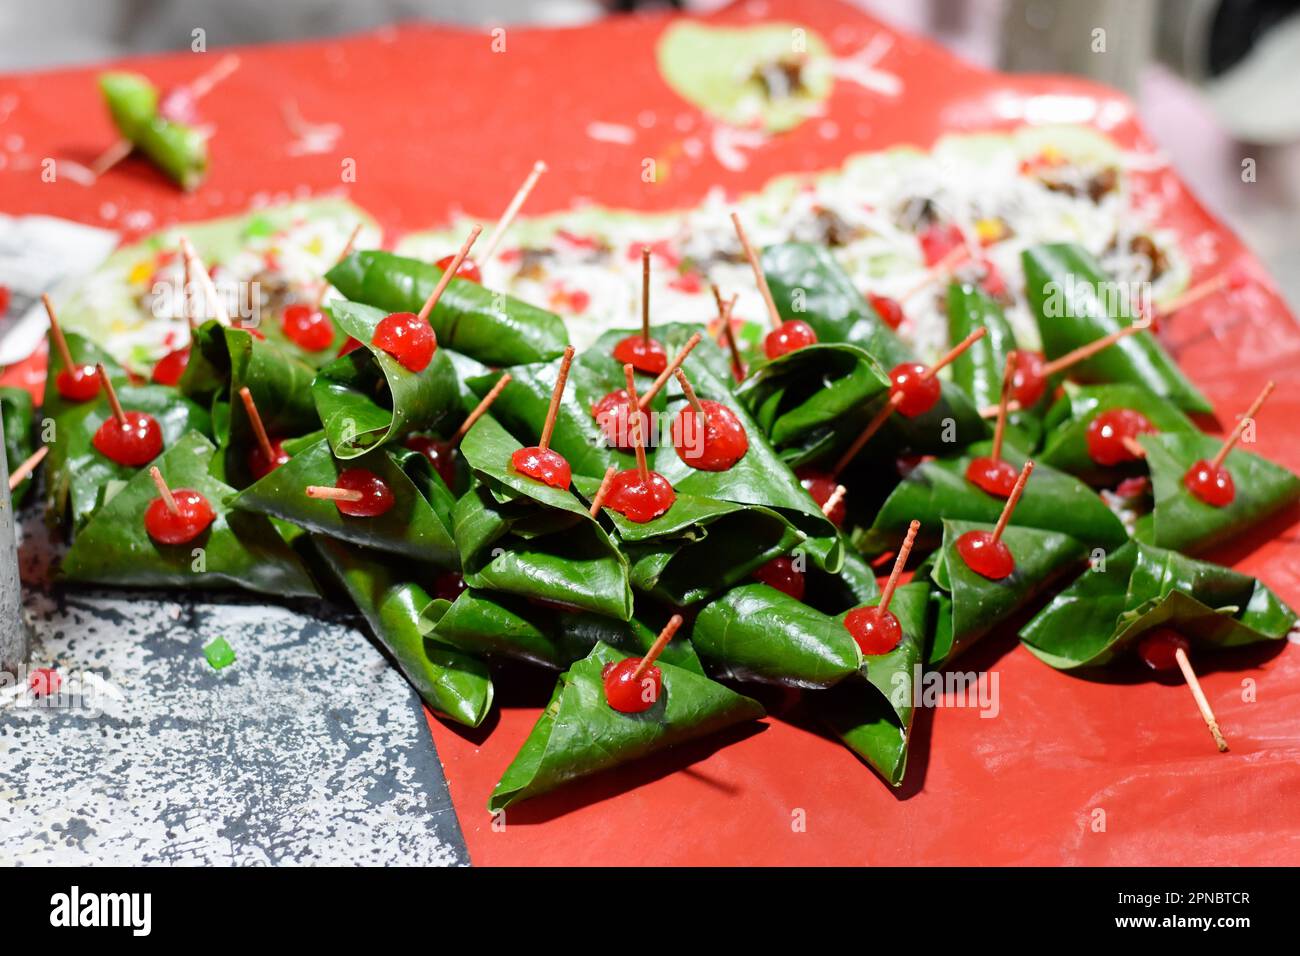 Masala Paan, Meetha Paan, or Beeda, Indian Traditional Mouth Freshener Sweet Paan wrapped in betel leaf, often used as an after dinner digestive, Pune Stock Photo